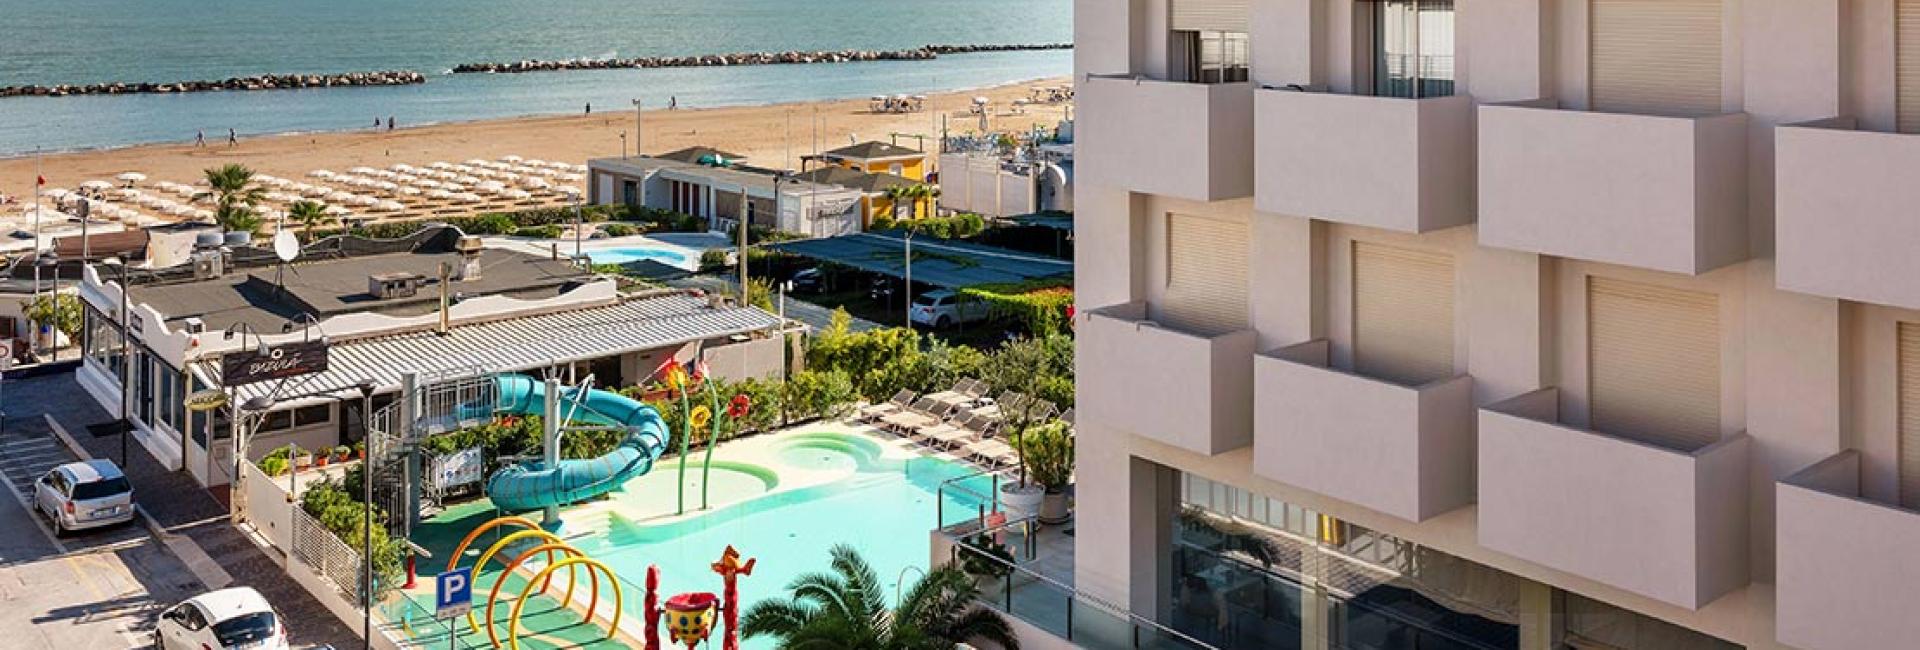 cattolicafamilyresort en july-in-cattolica-at-family-hotel-with-pool-and-entertainment 010